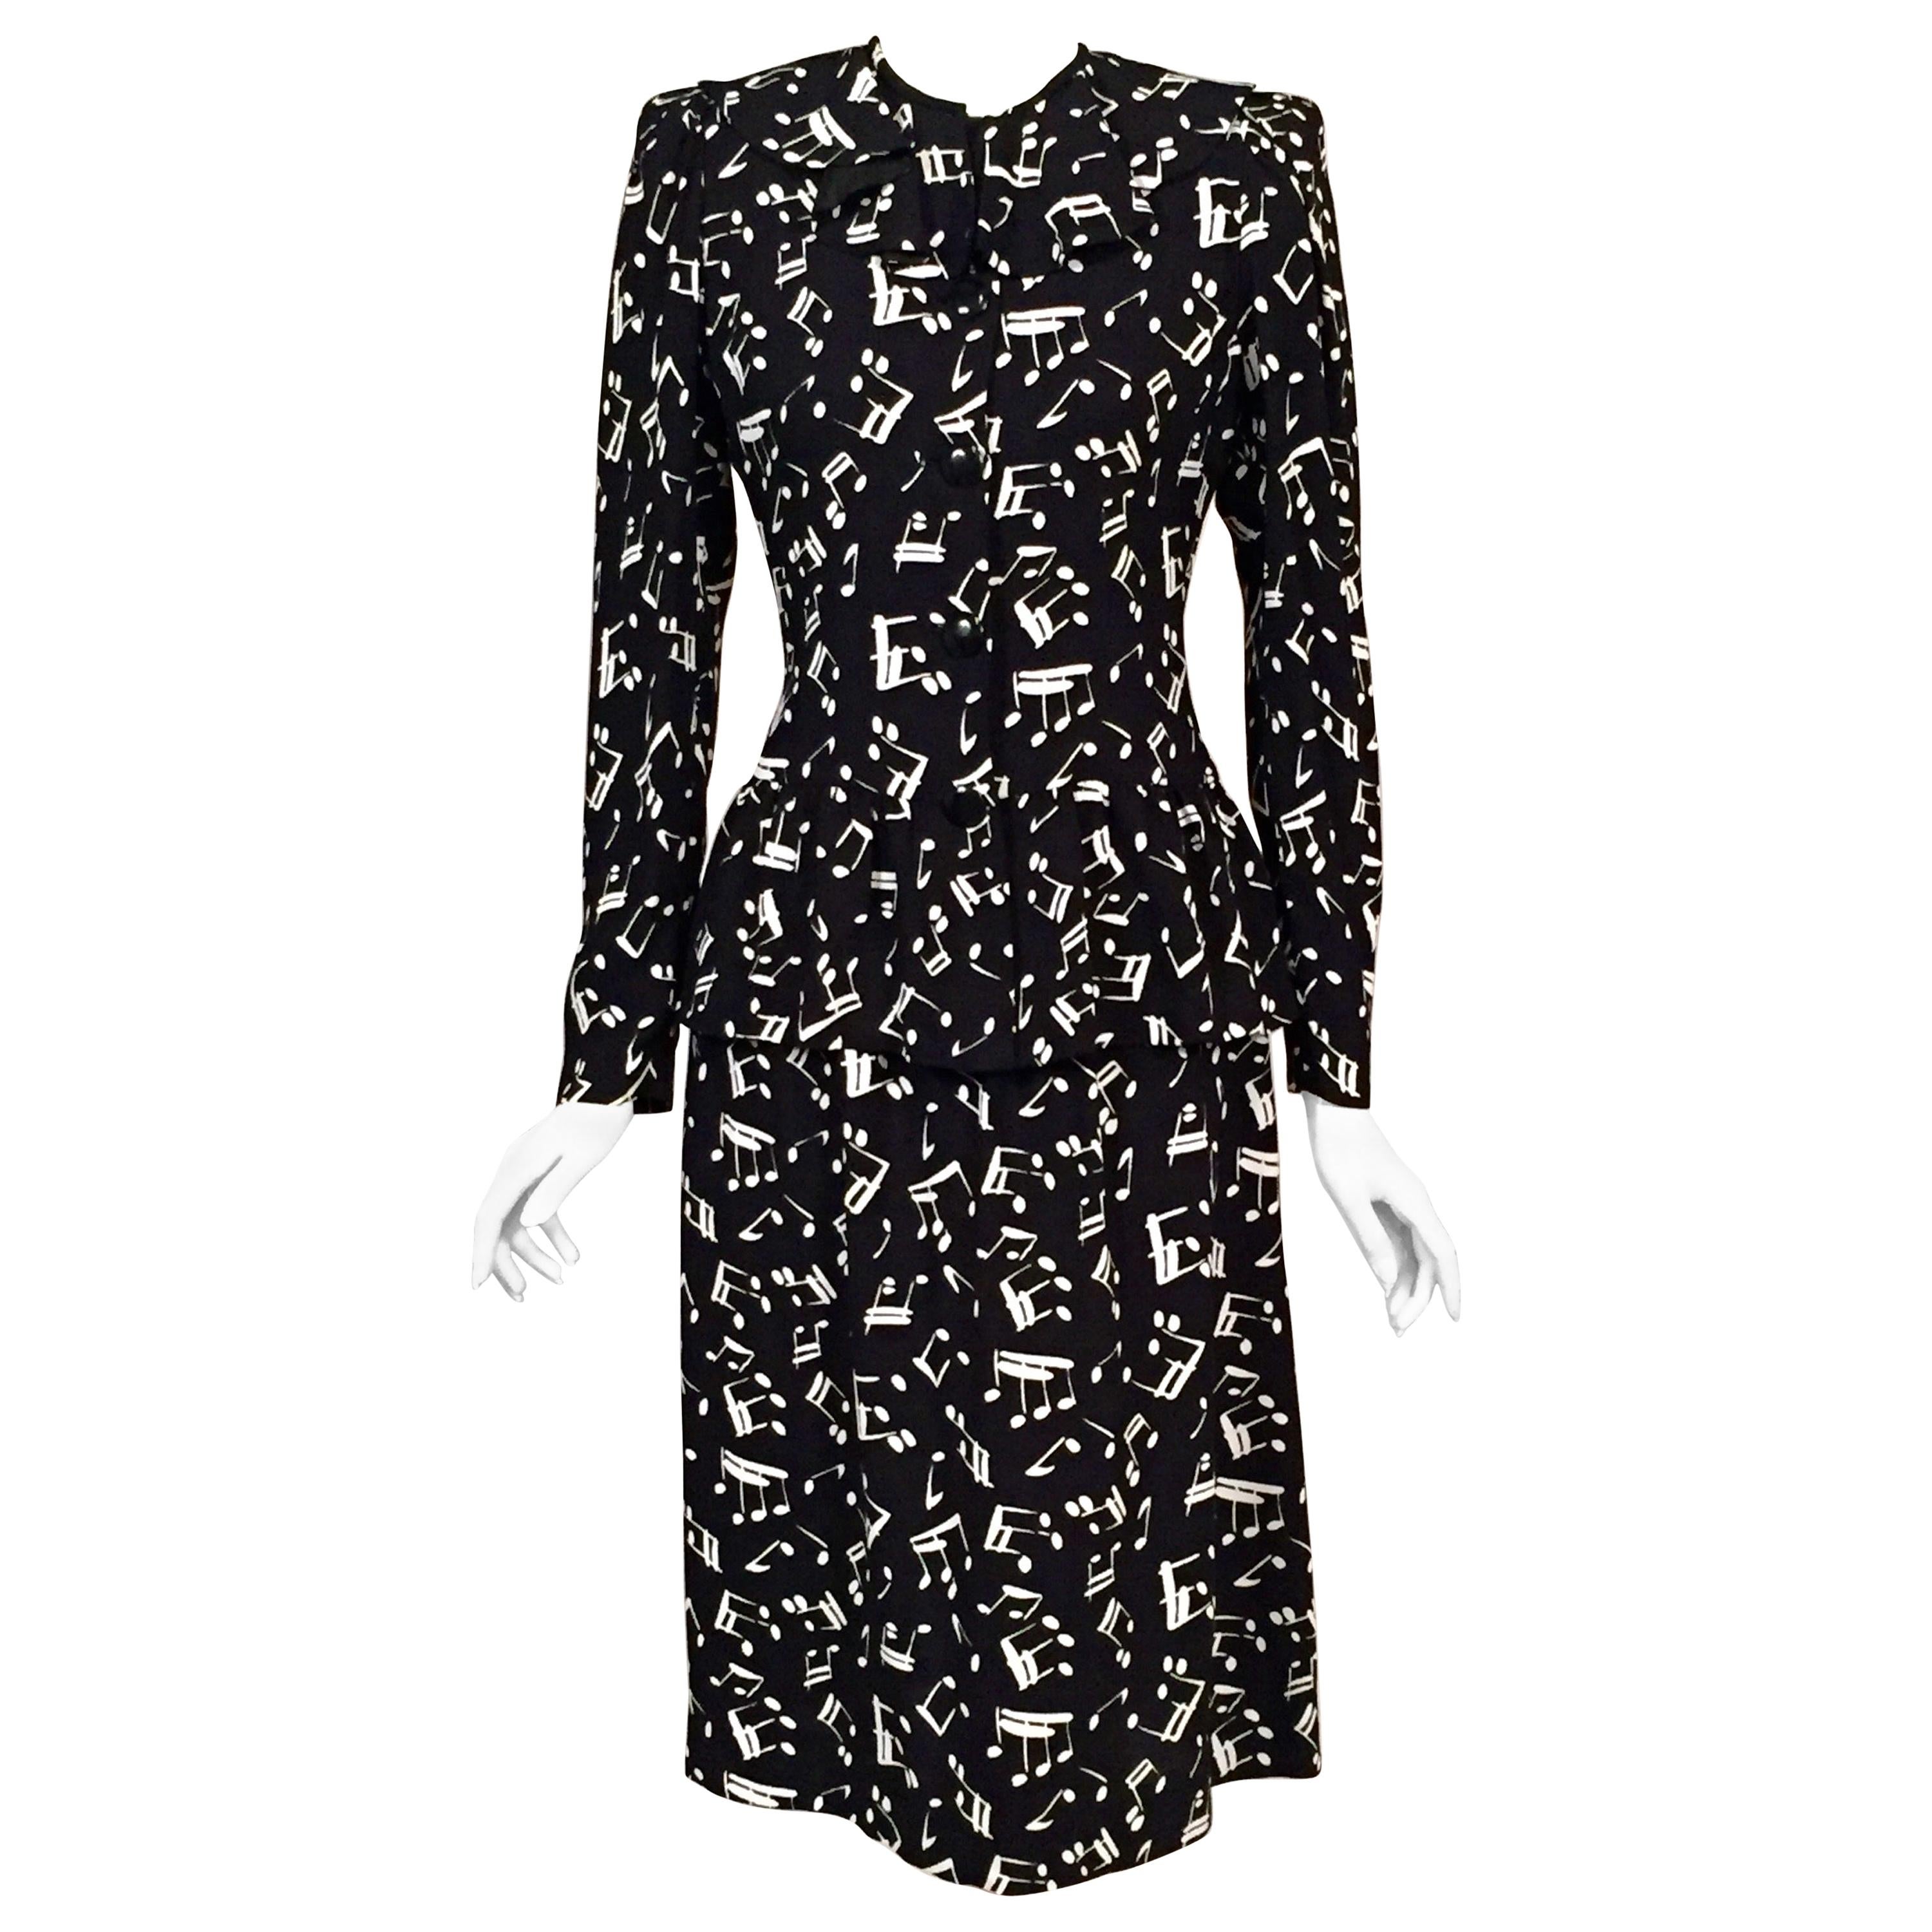 Yves Saint Laurent Two Piece Dress Music Notes Black and White Print